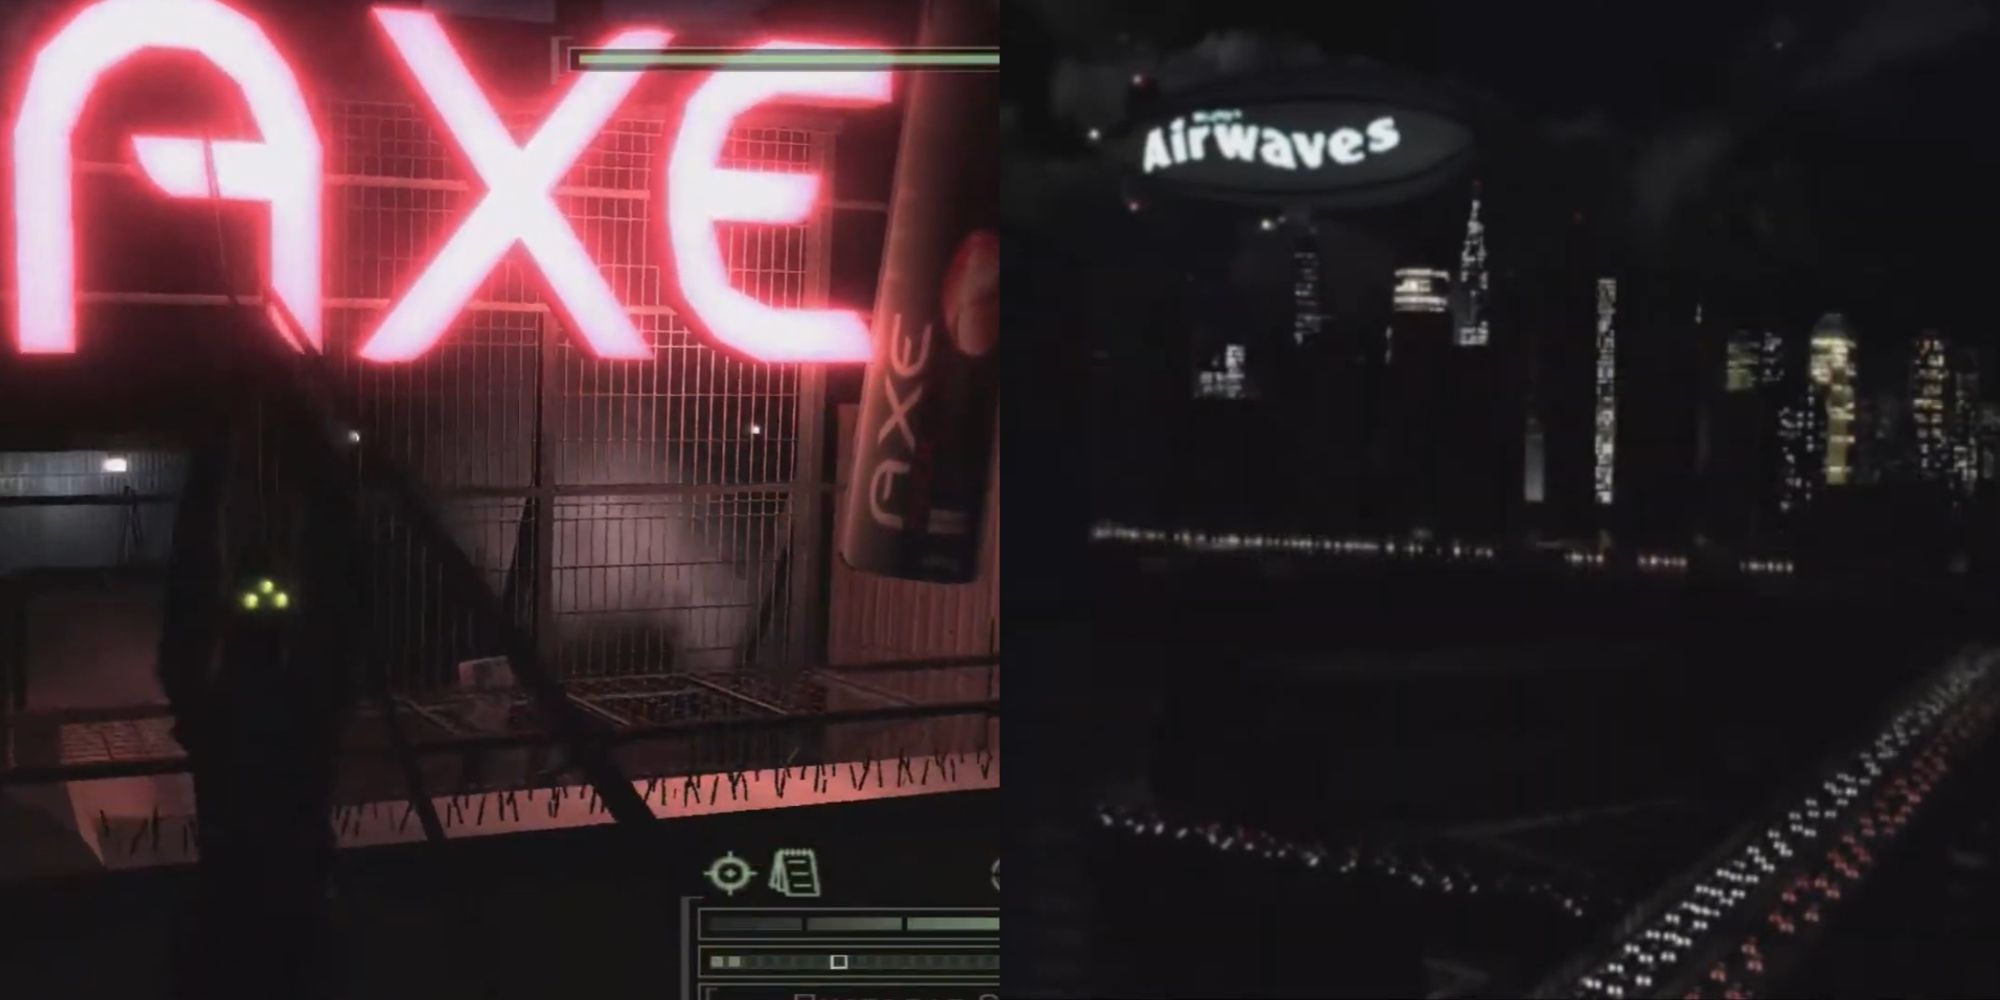 A split image photo of Sam Fisher ziplining off a building with a giant Axe neon sign in the background, and a blimp with the Airwaves logo over the skyline in black and white.